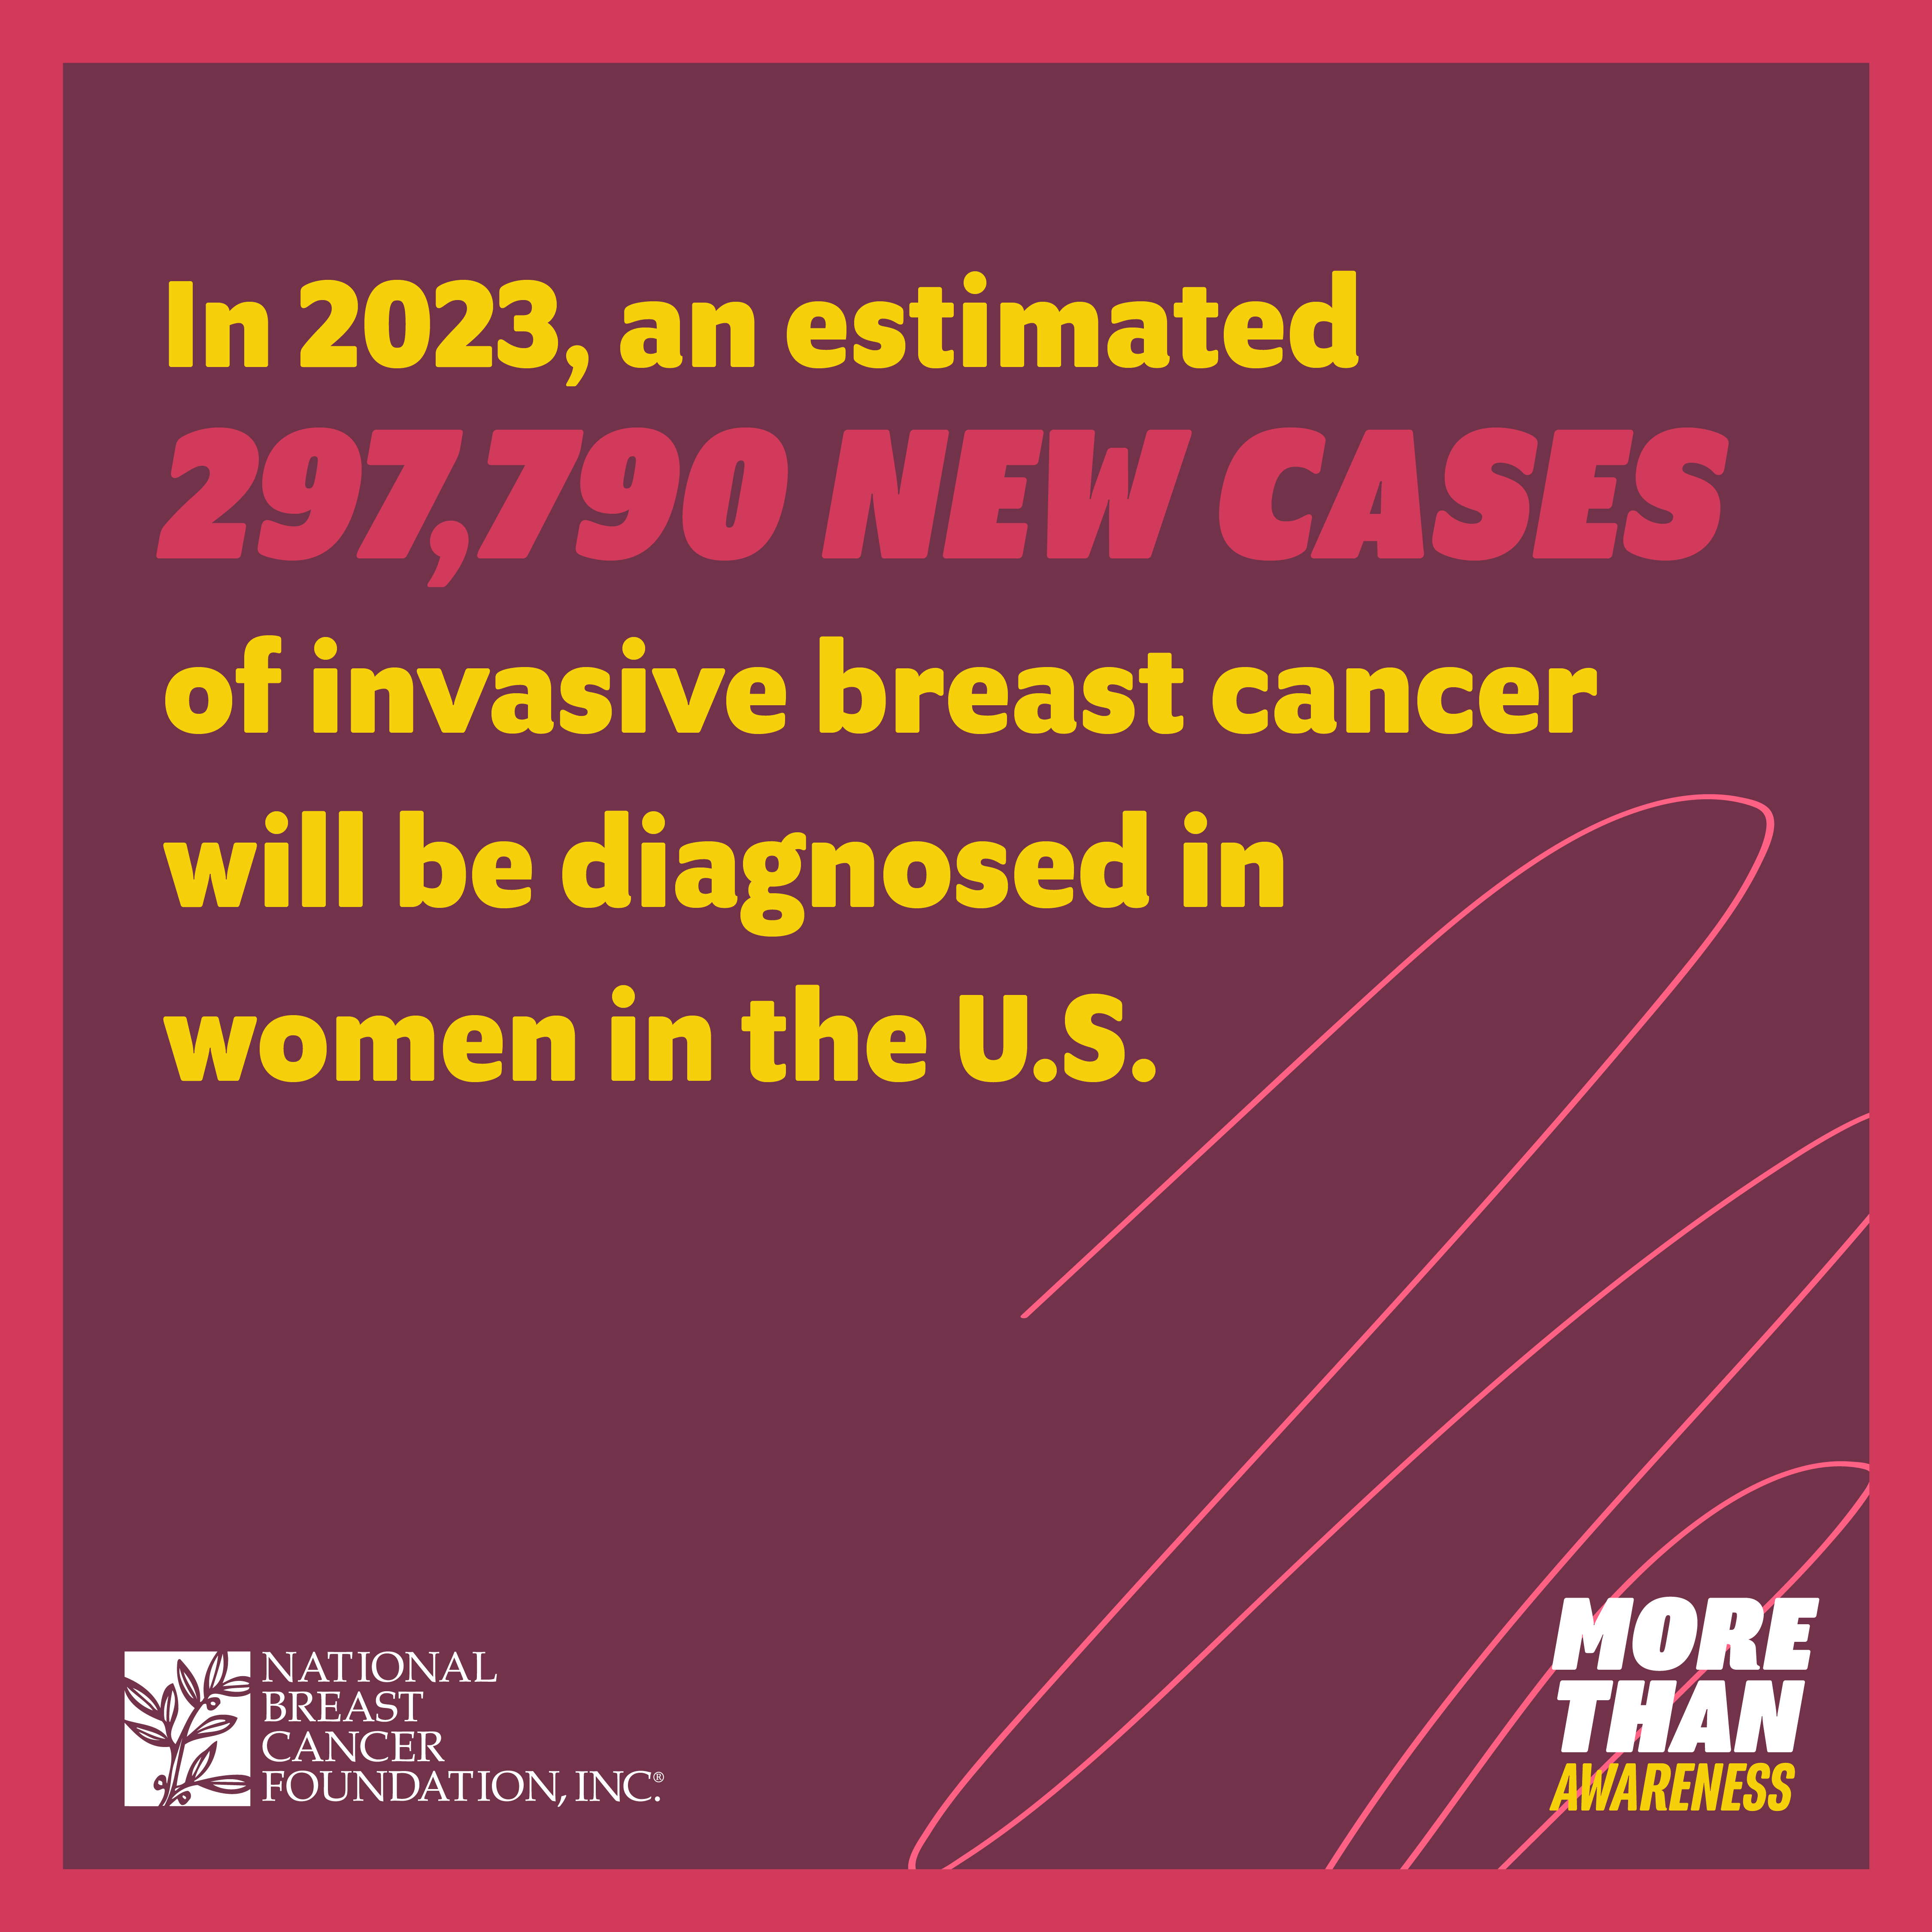 In 2023, an estimated 297,790 new cases of invasive breast cancer will be diagnosed in women in the U.S.